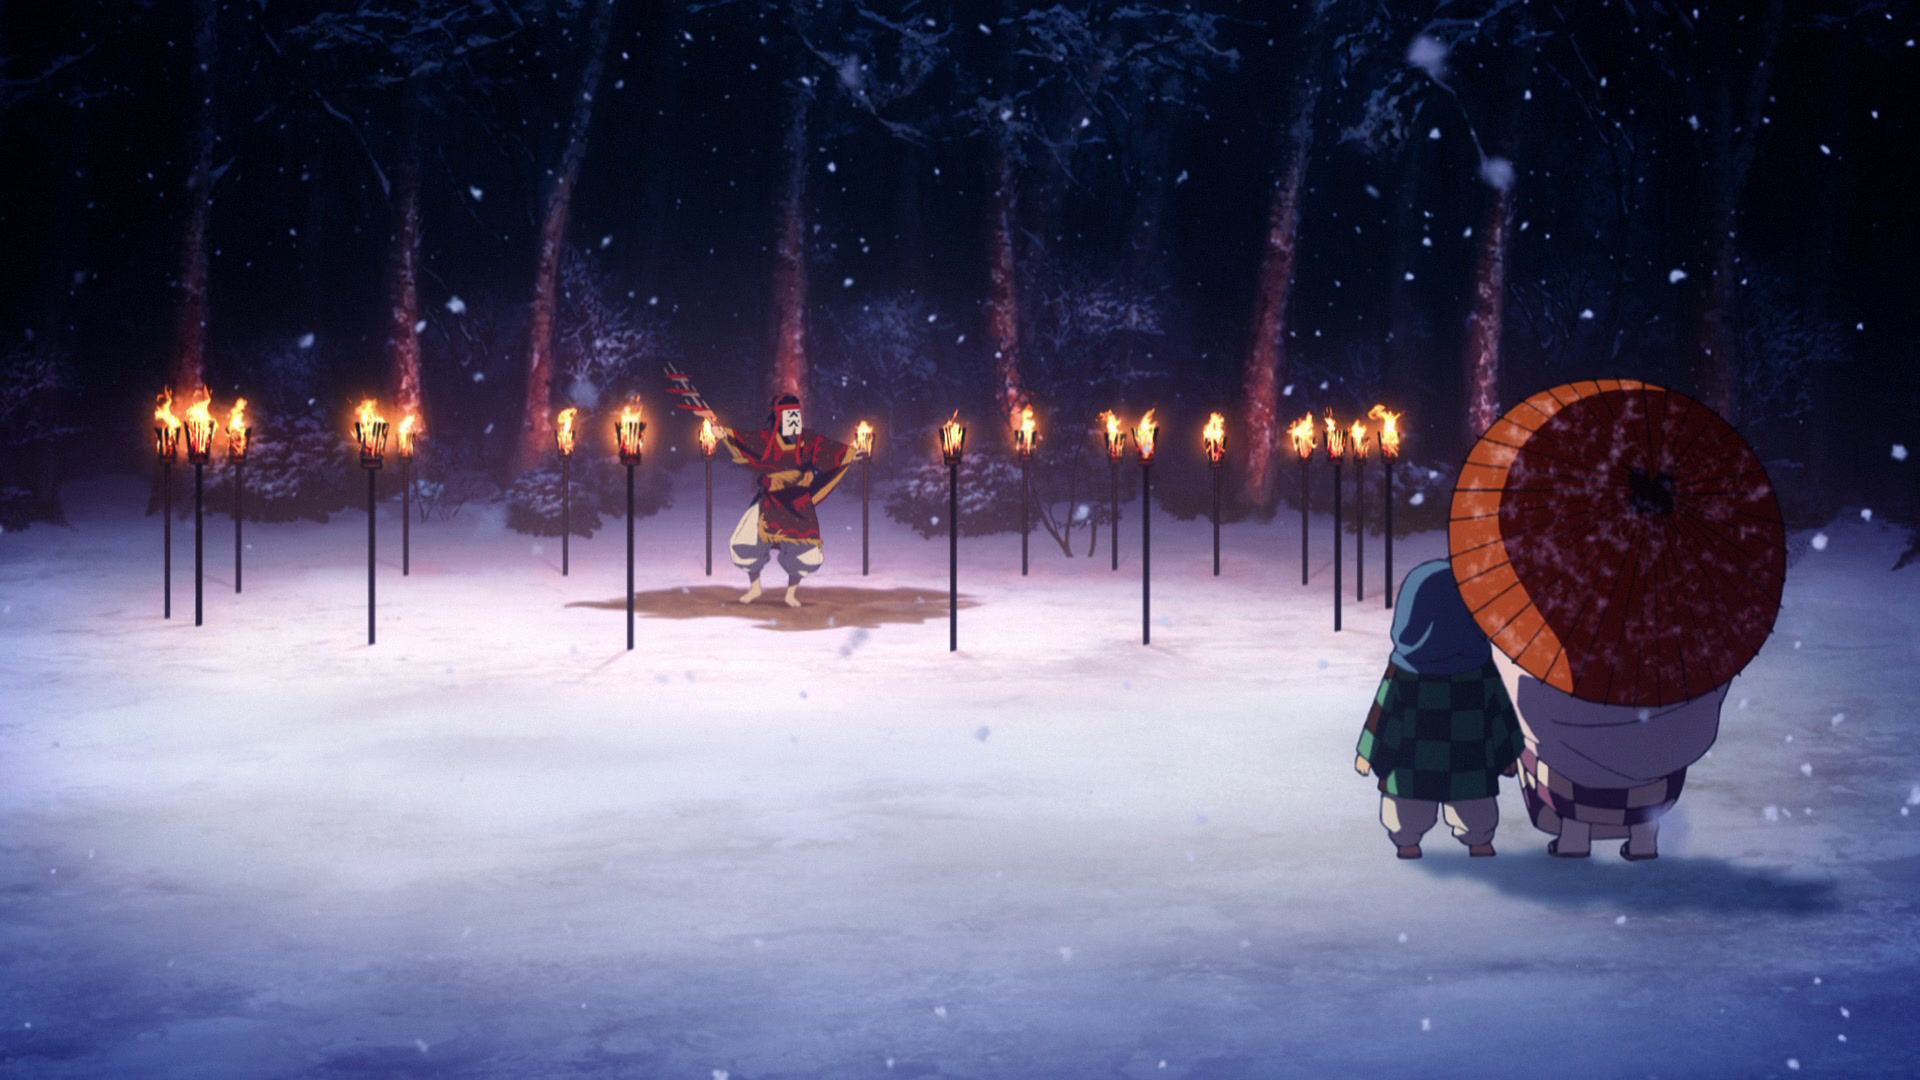 Tanjiro and his mother watch as his father performs the kagura dance.